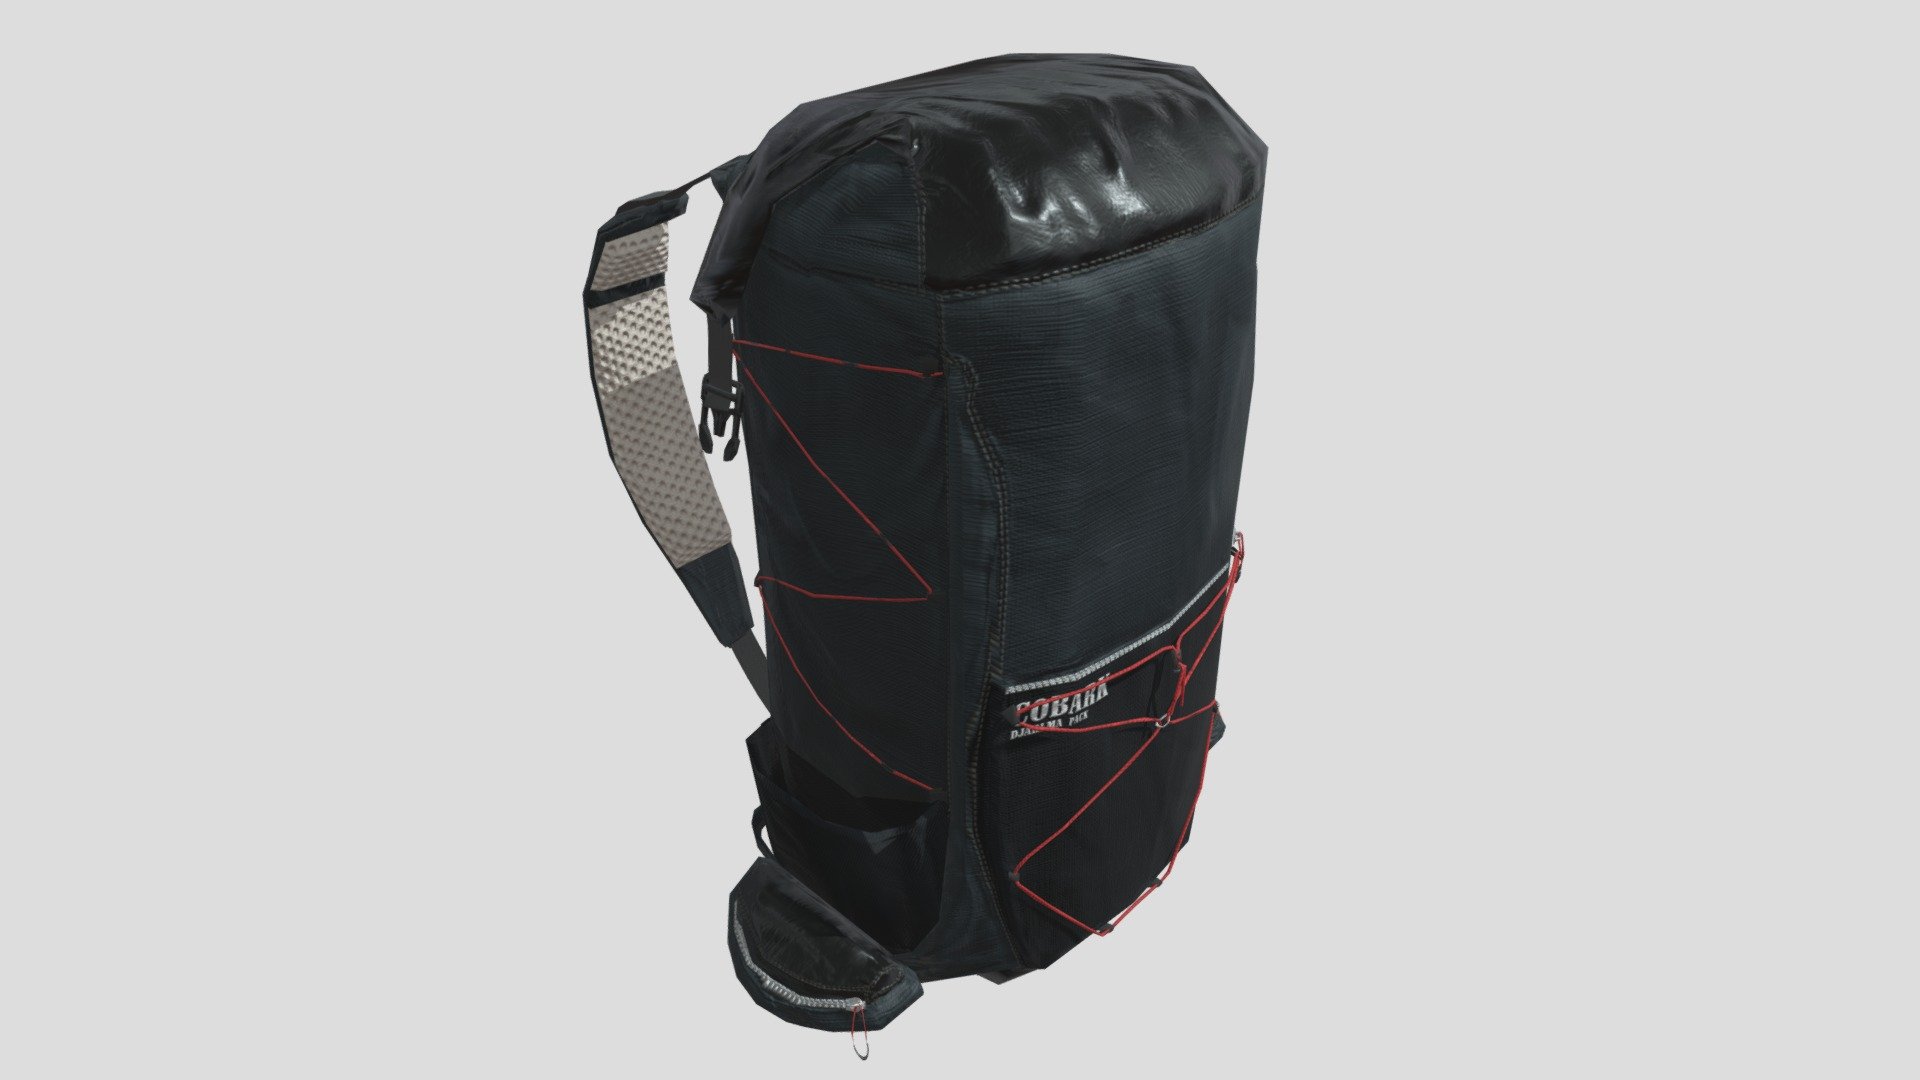 A gameready asset of a camping backpack.

Textured with 2x2k textures in substance painter, Used the new substance painter unwrapper, unfortunately this has the unforseen side effect for triangulating the mesh which made it difficult to reduce the topology in any meaningful way. So I justed used the decimate modifier, as such this model is really only appropriate for static non animated use 3d model